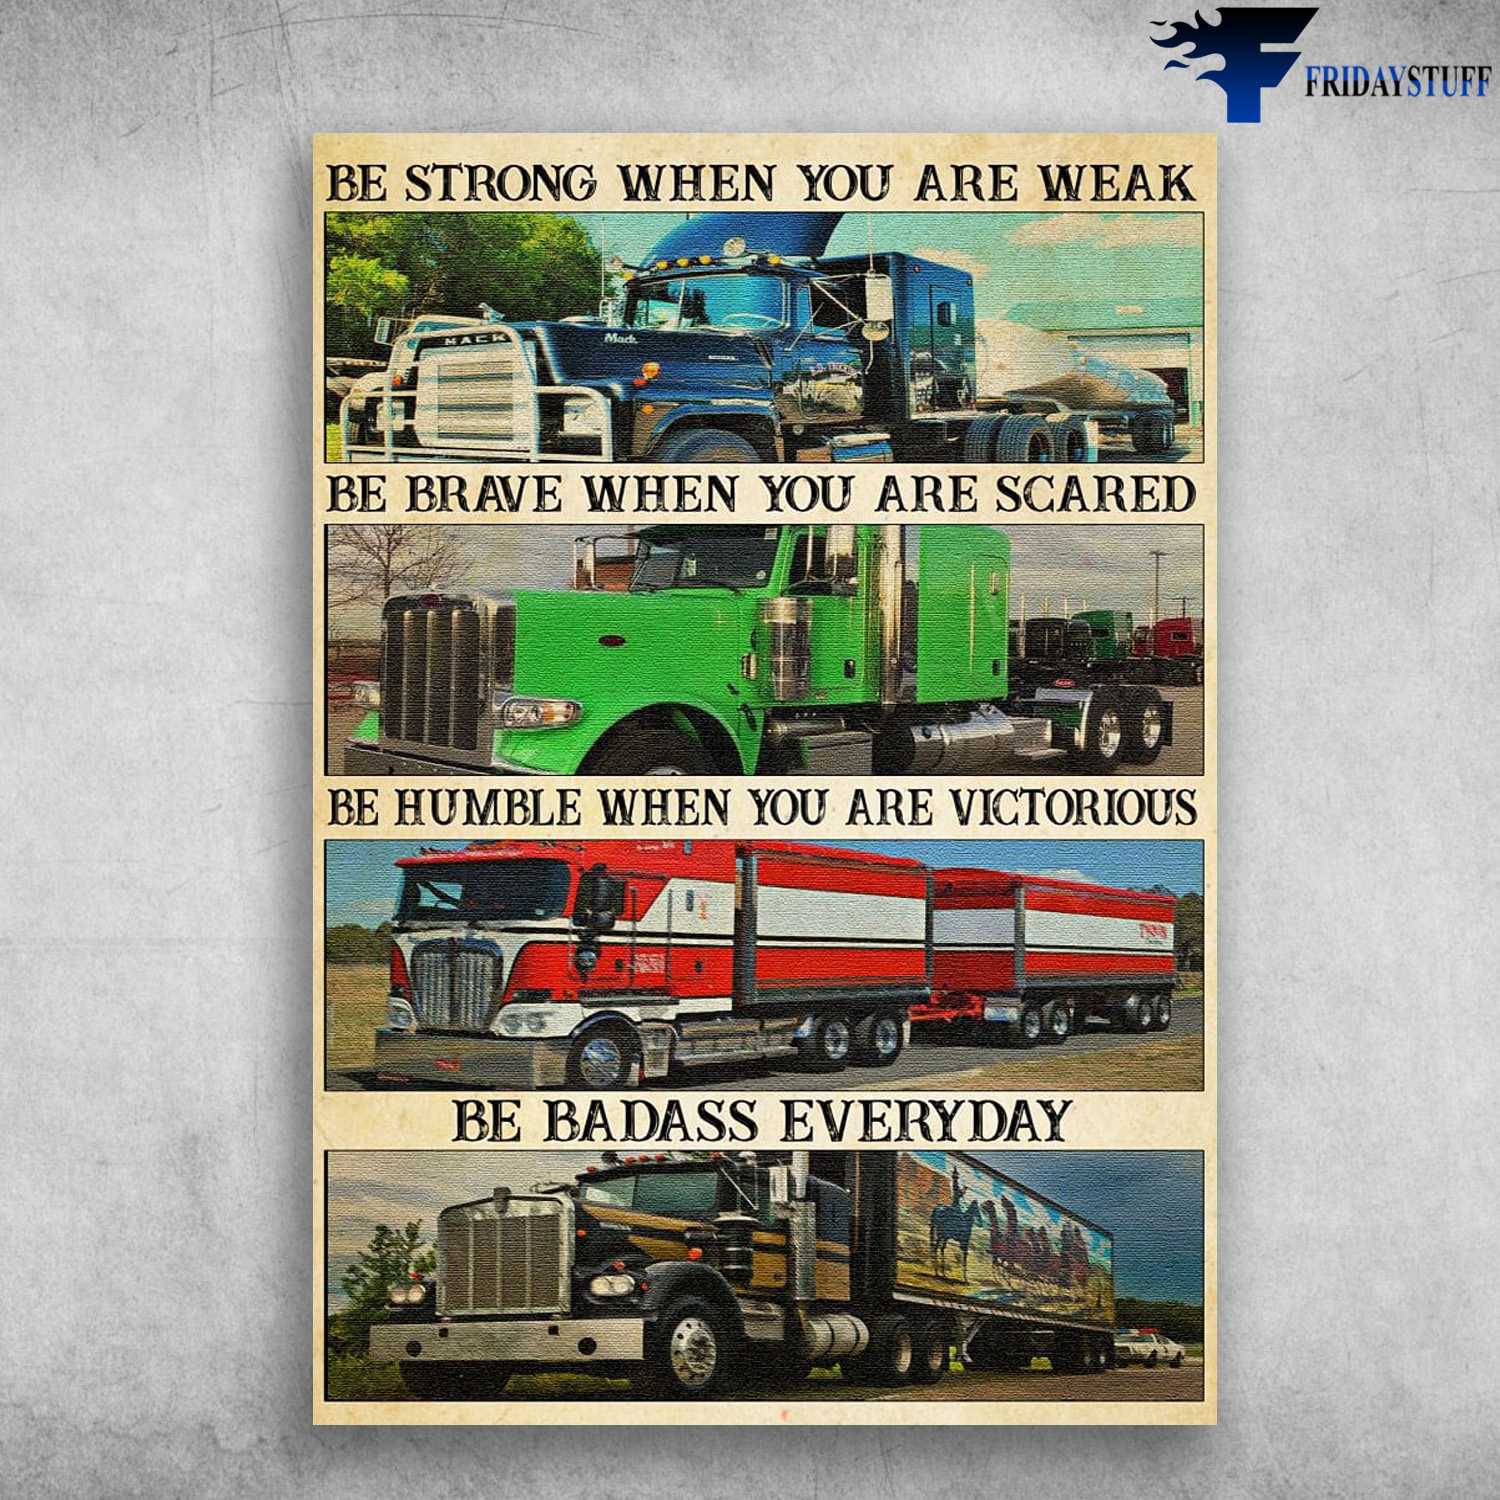 Trucker Poster, Gift For Trucker, Be Strong When You Are Weak, Be Brave When You Are Scared, Be Humble When You Are Victorious, Be Badass Everyday